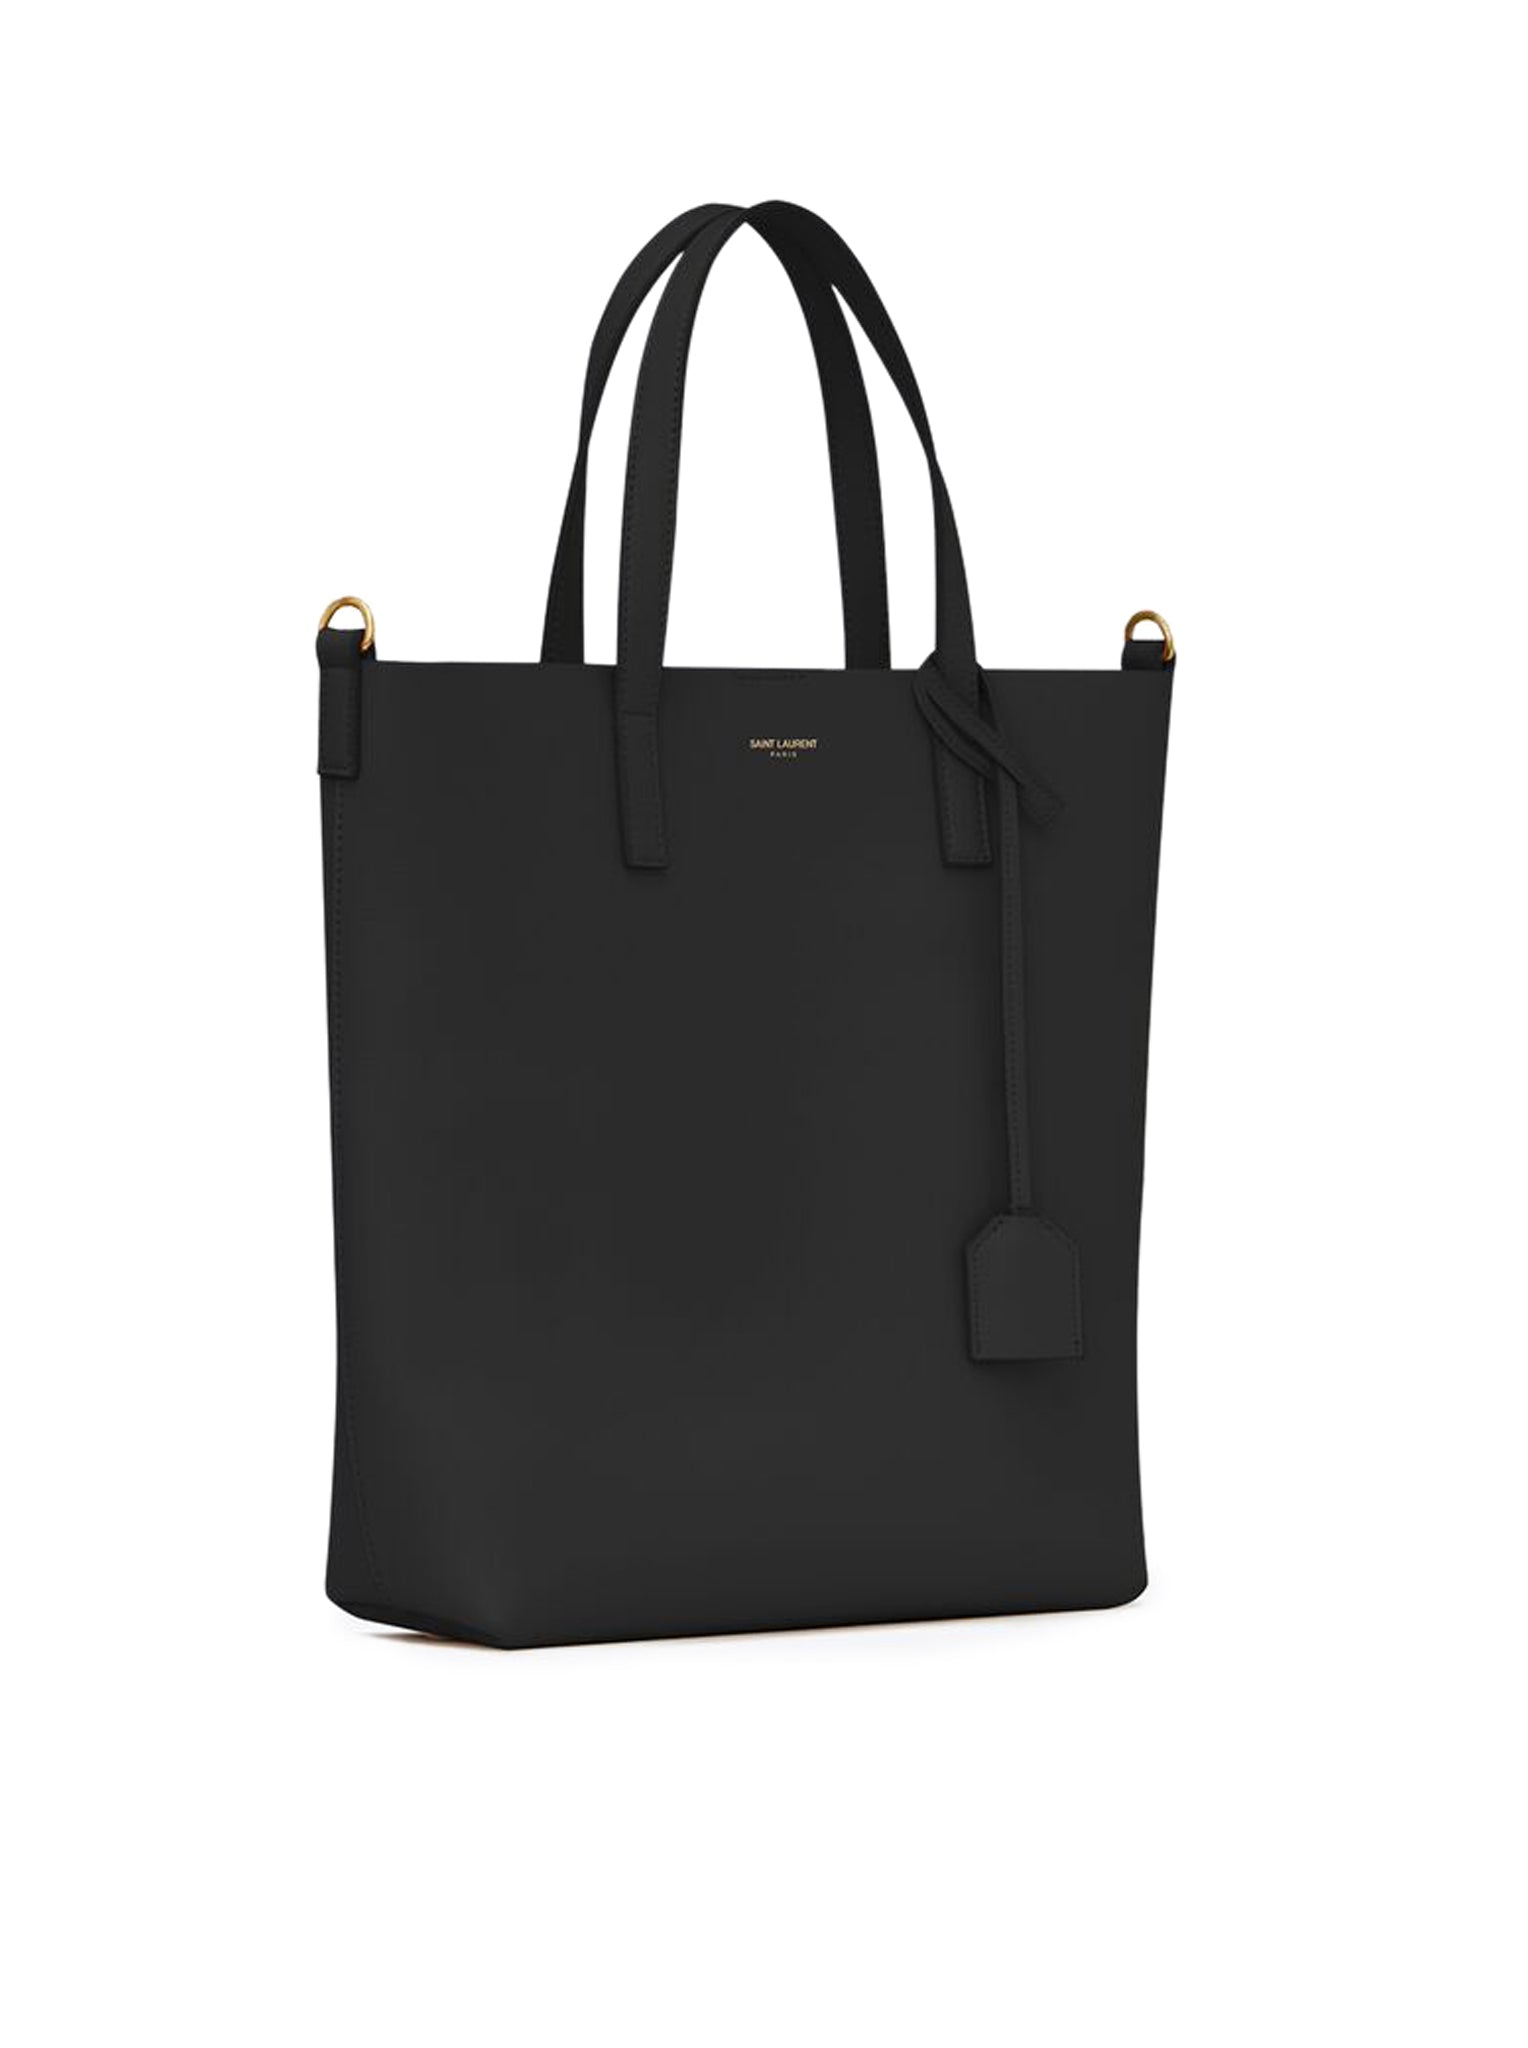 SAINT LAURENT TOY SHOPPING BAG IN BLACK LEATHER